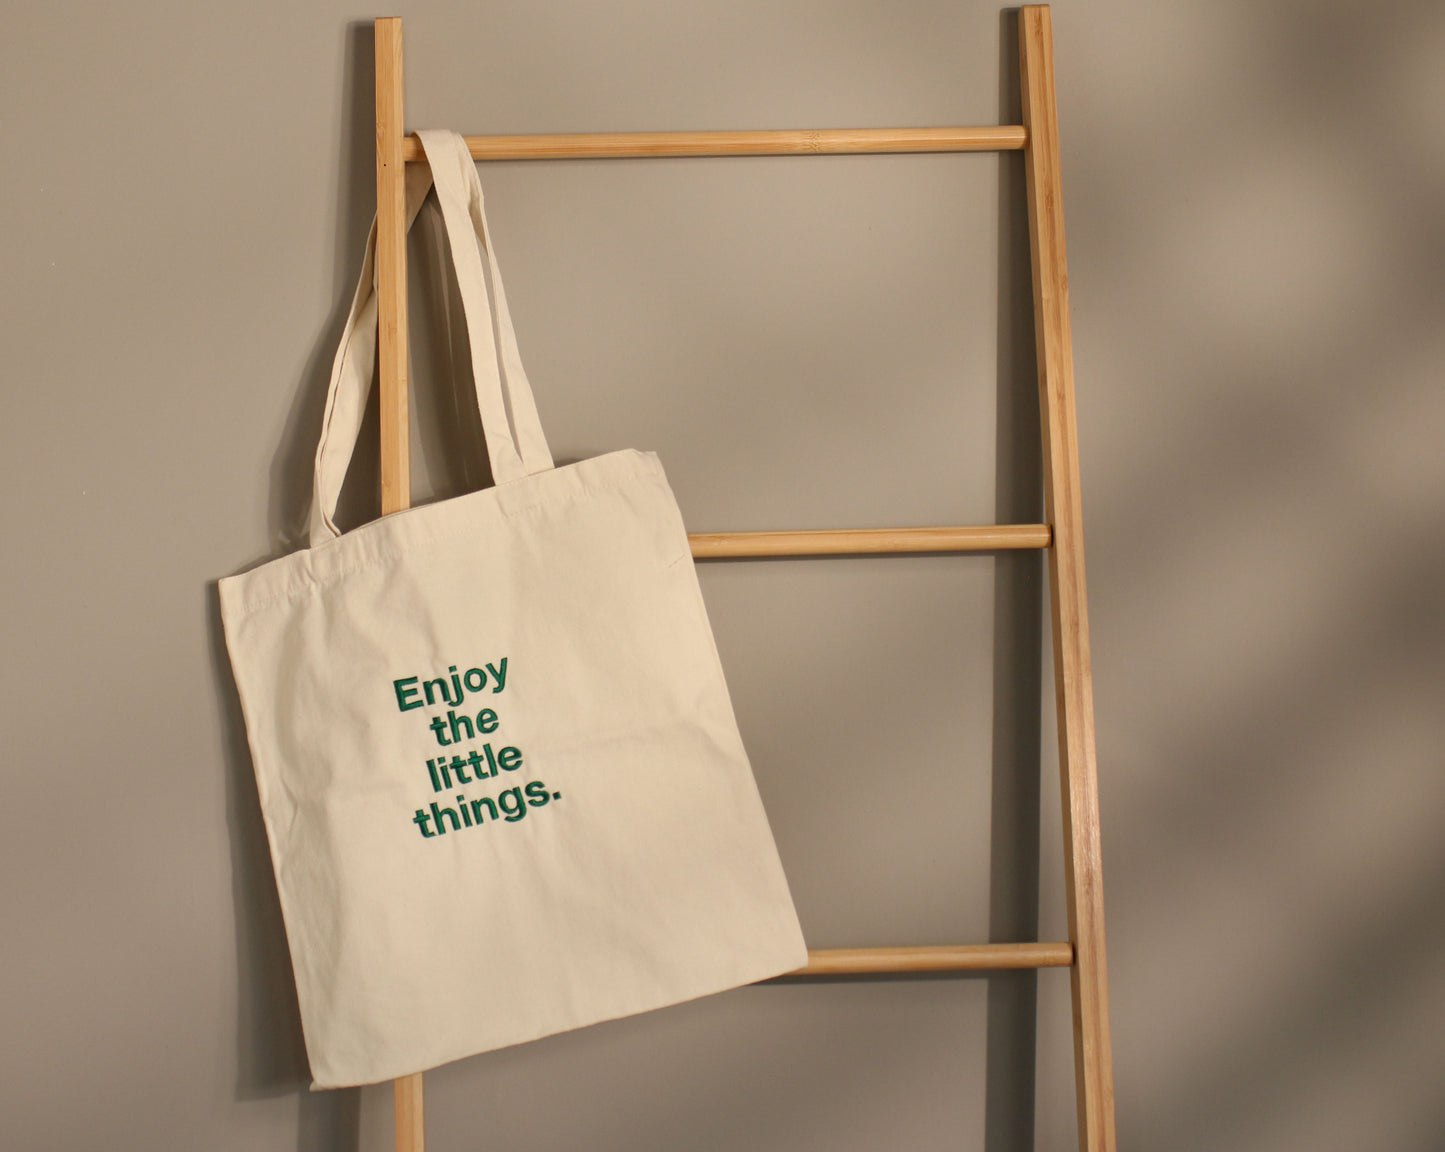 Enjoy the little things - Tote bag